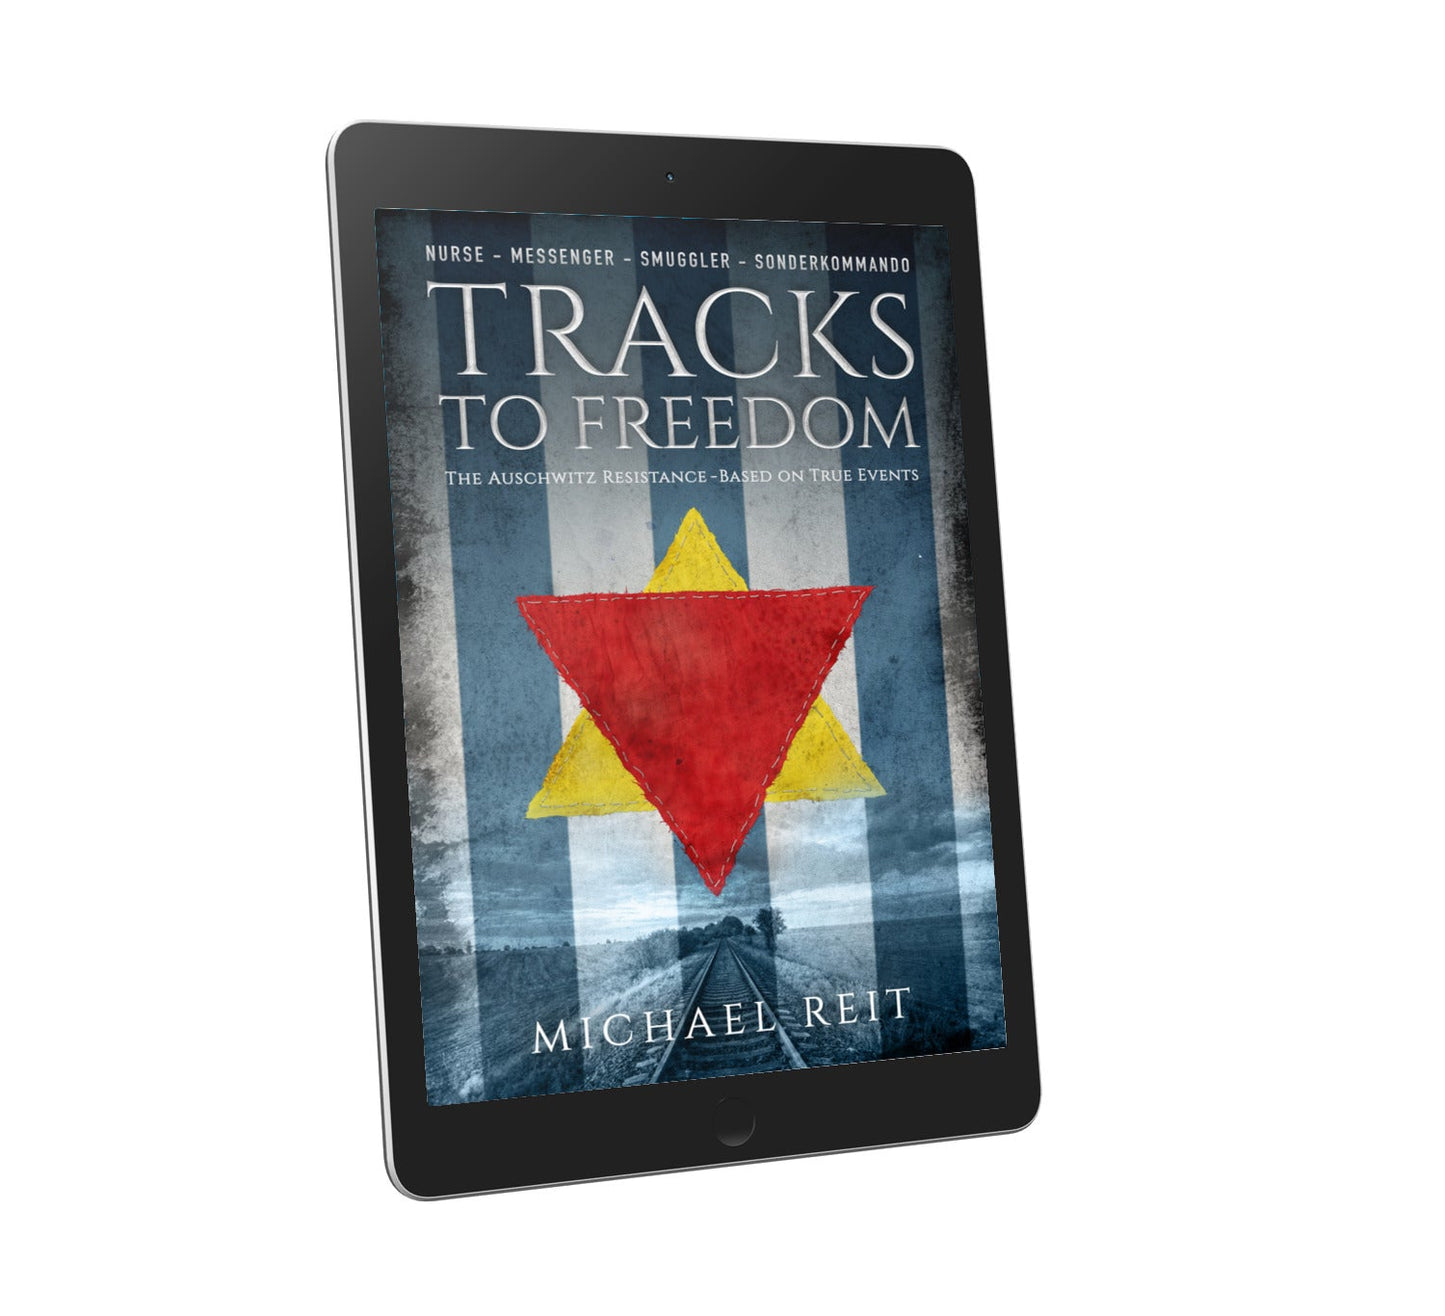 Tracks to Freedom, Ebook deal